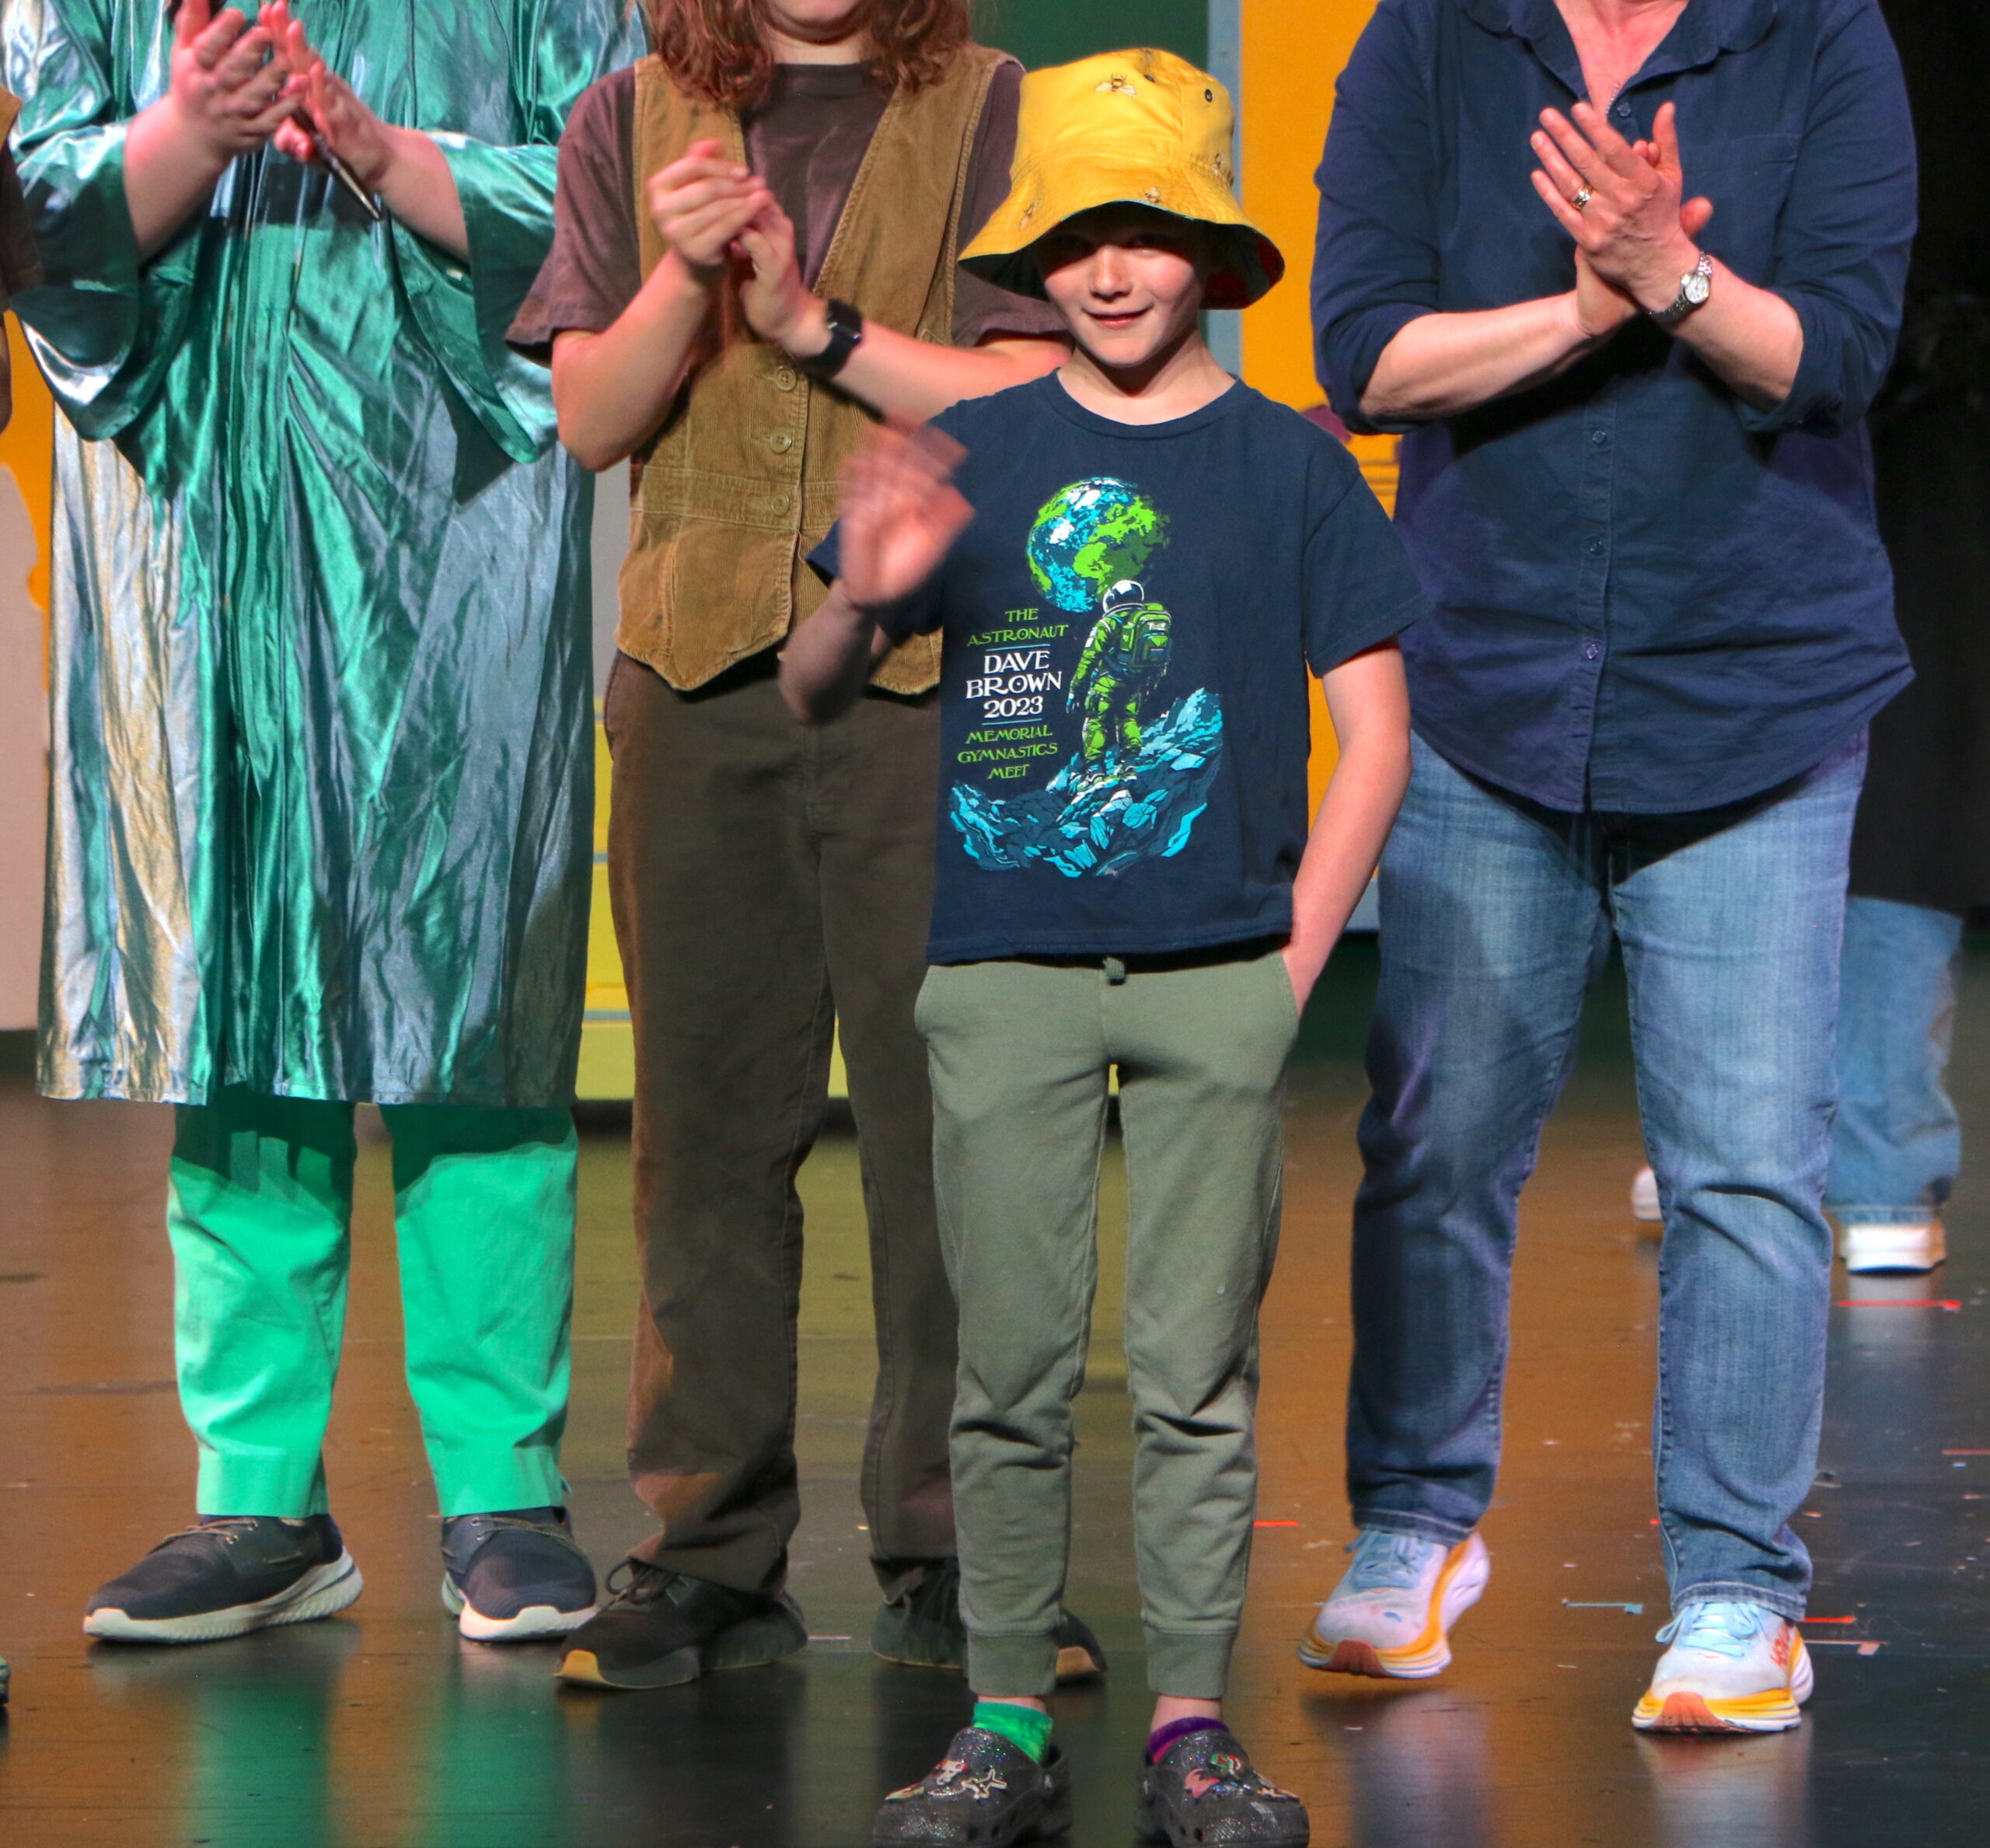 Students performing on stage - one in the middle with a yellow hat with others clapping around them